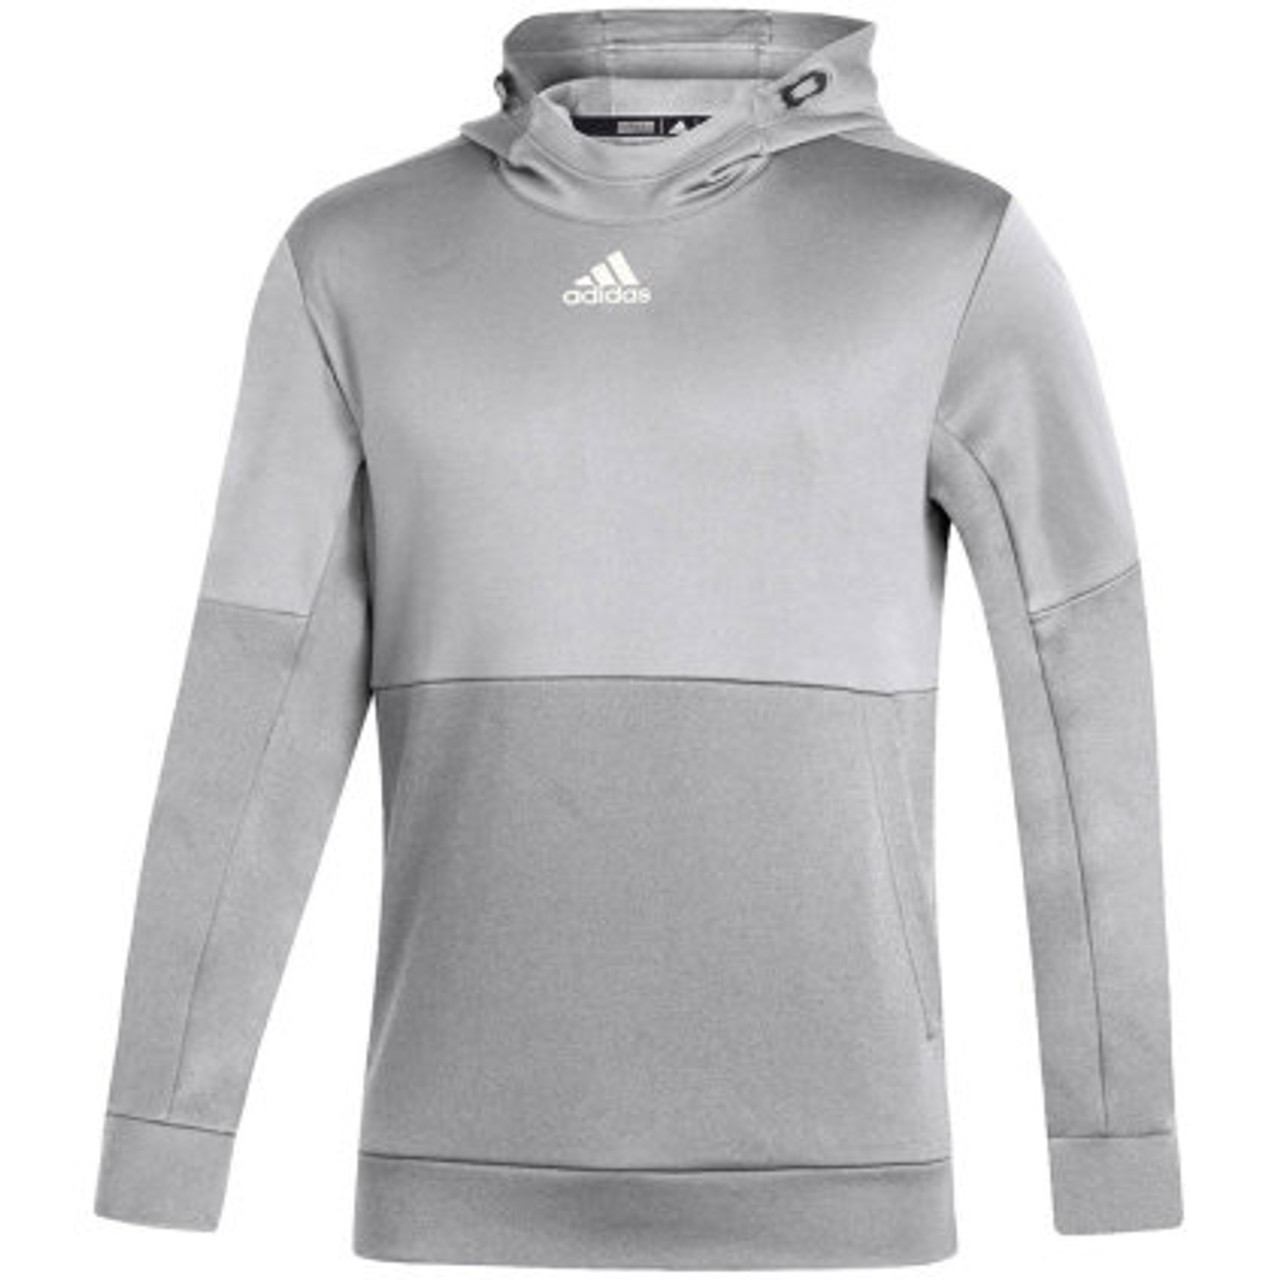 ISSUE PULLOVER HOODY GREY (FQ0153) - Fitness Sports